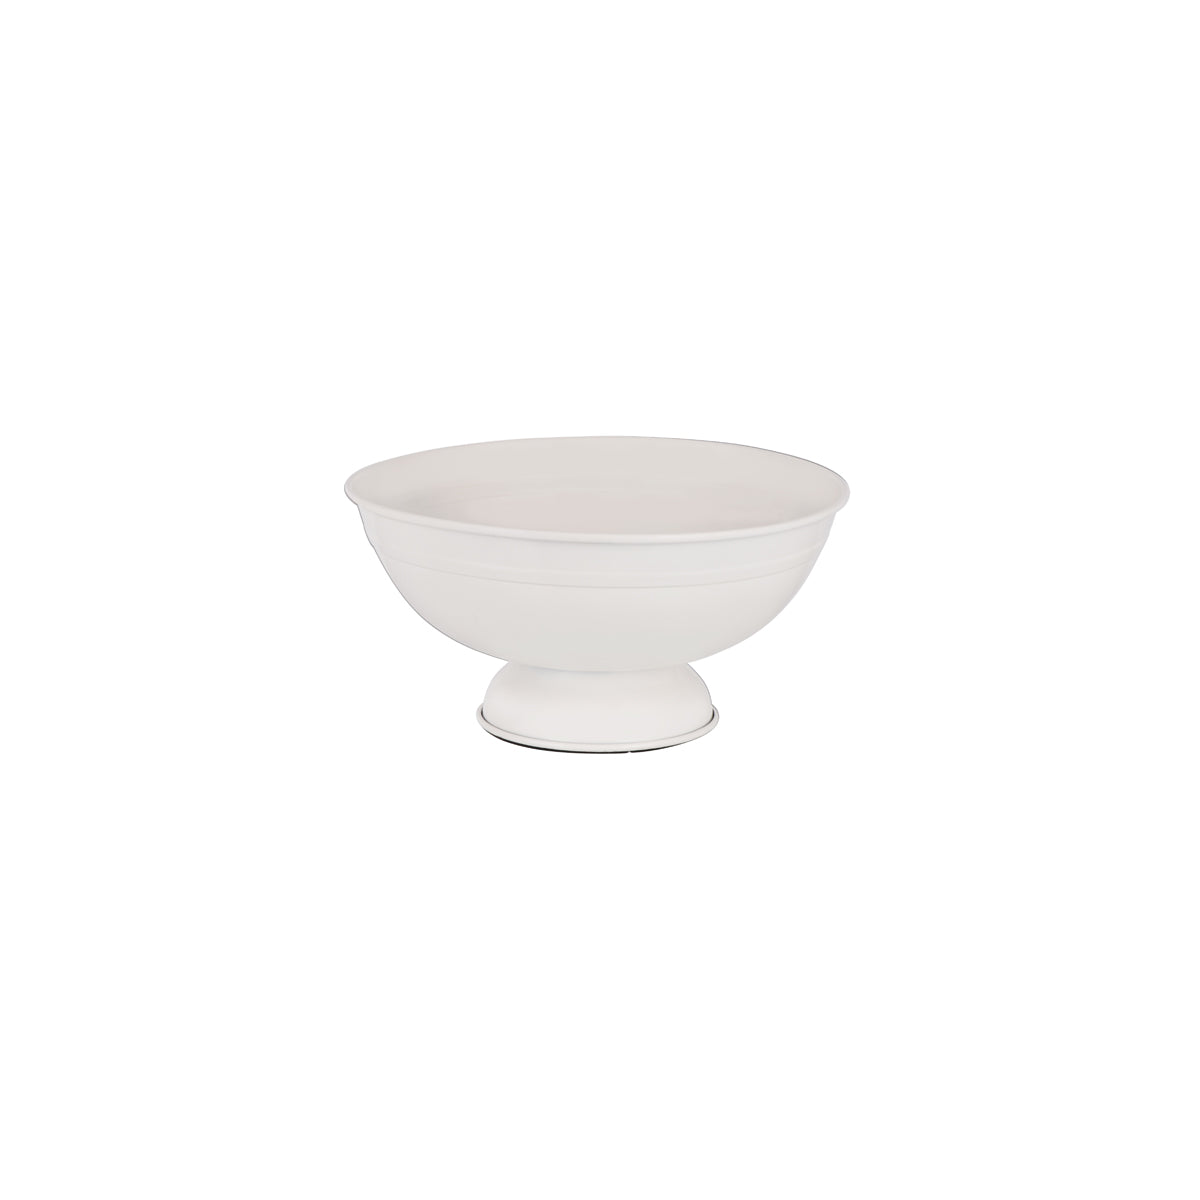 78822 Chef Inox Coney Island Creme Powder Coated Footed Serving Bowl 305x150mm Tomkin Australia Hospitality Supplies